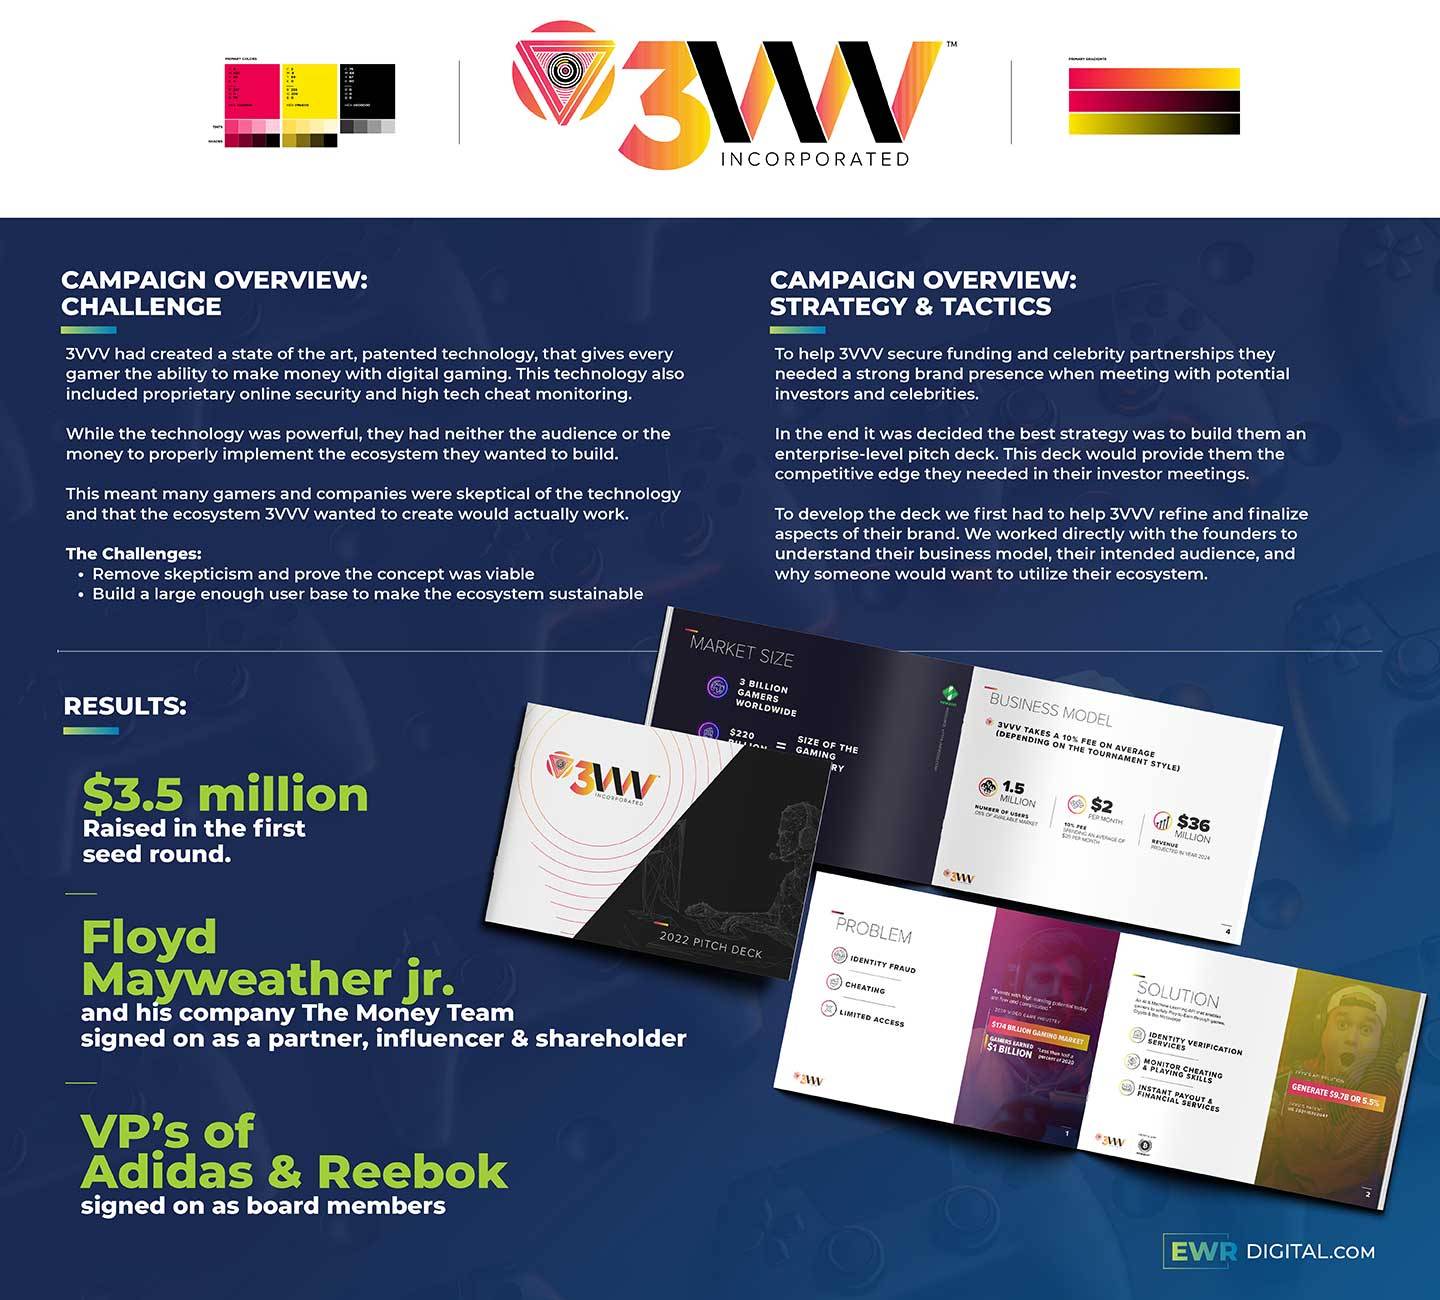 Case study showing how we designed a pitch deck for 3VVV which helped them secure $3.5 million in funding